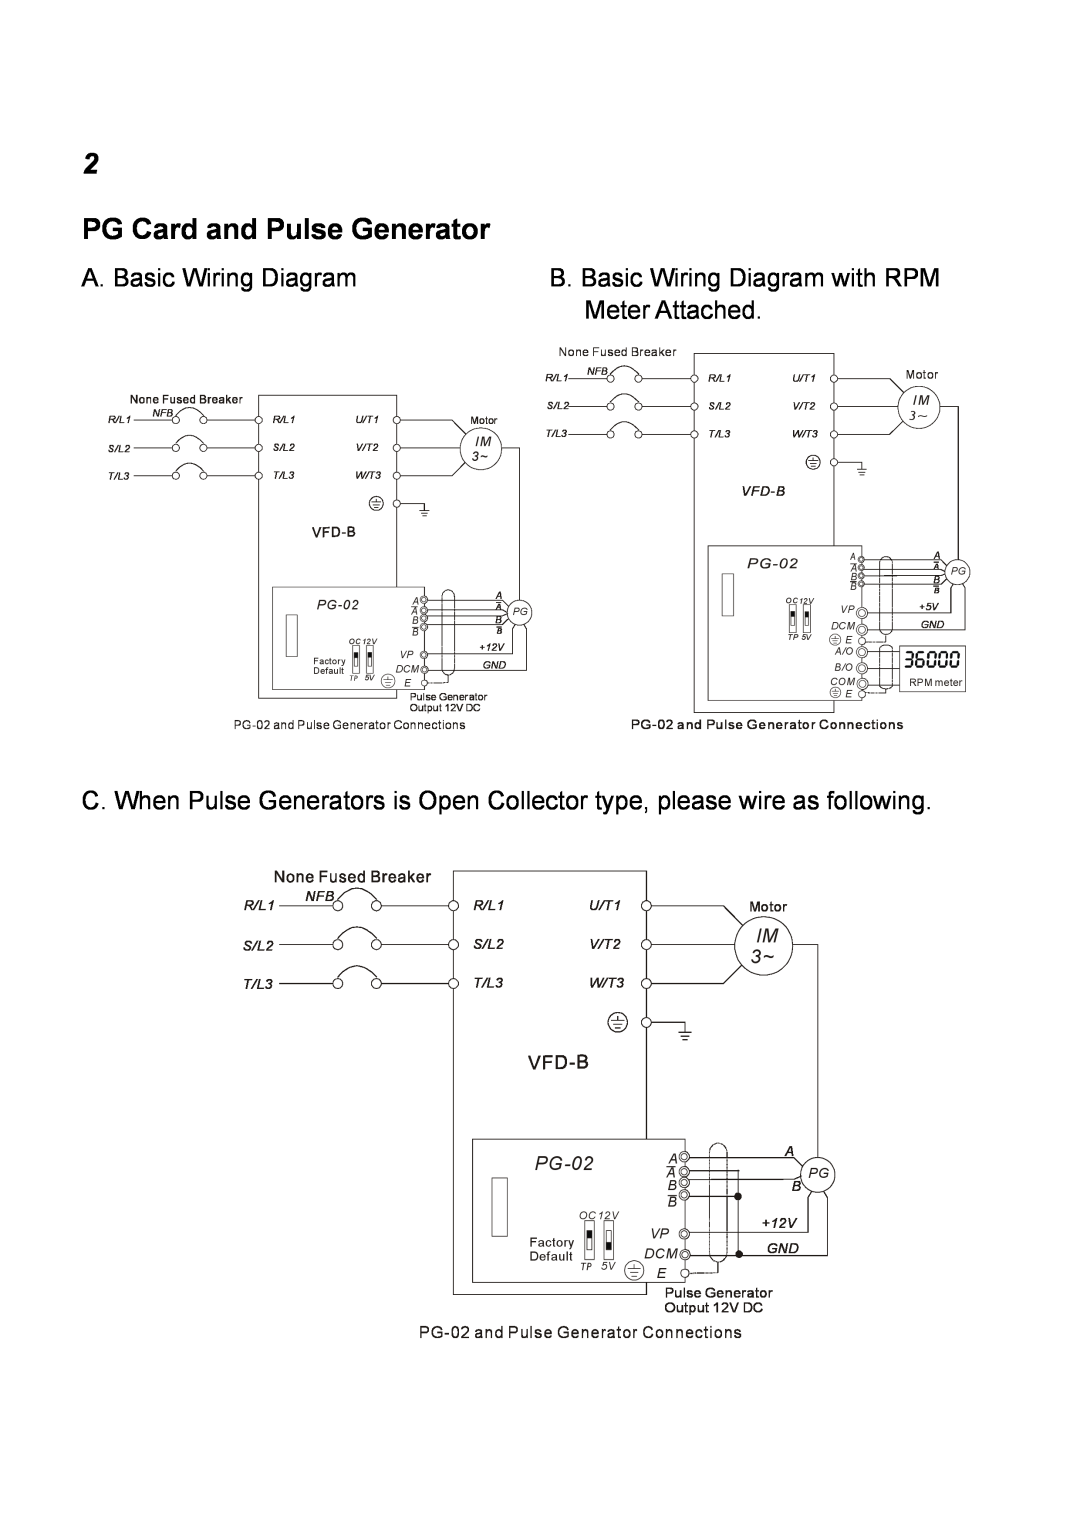 Delta Electronics PG-02 PG Card and Pulse Generator, A. Basic Wiring Diagram, Meter Attached, IM 3~, Vfd-B, Motor, +12V 